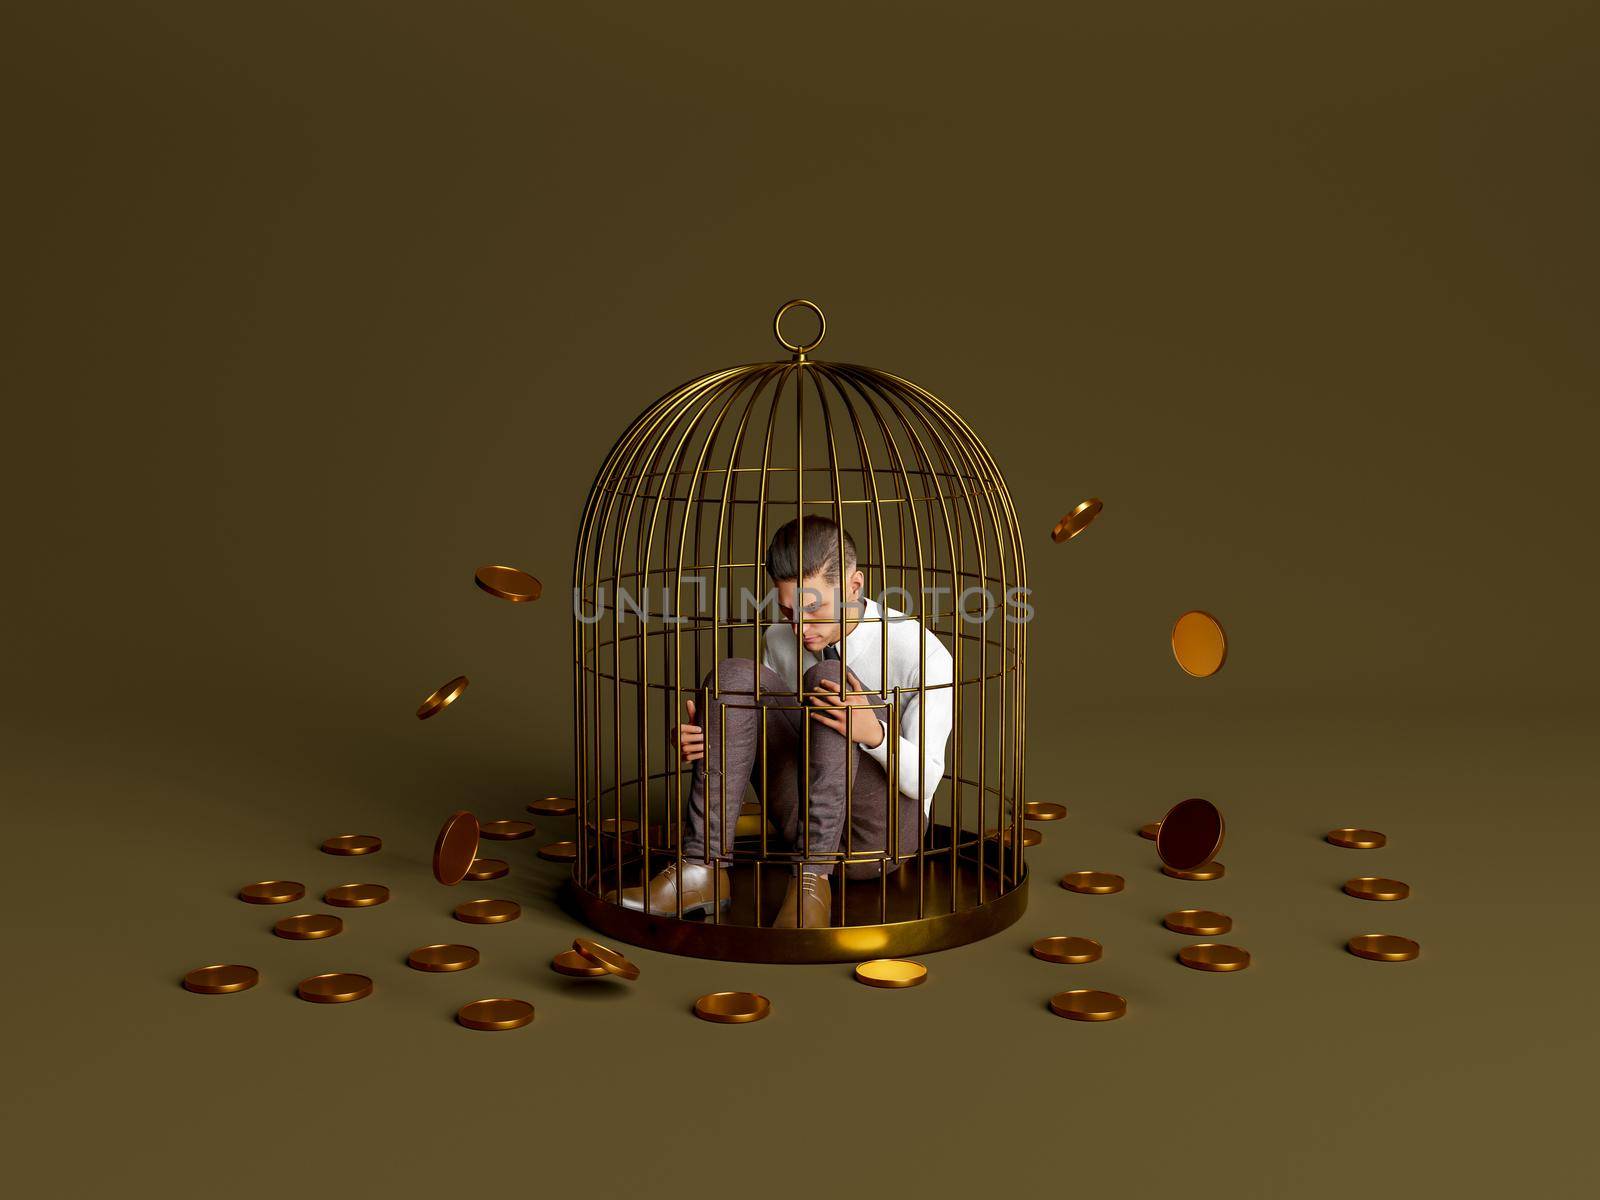 person inside a golden cage with coins falling around. concept of frustration, economy, failure and business. 3d rendering